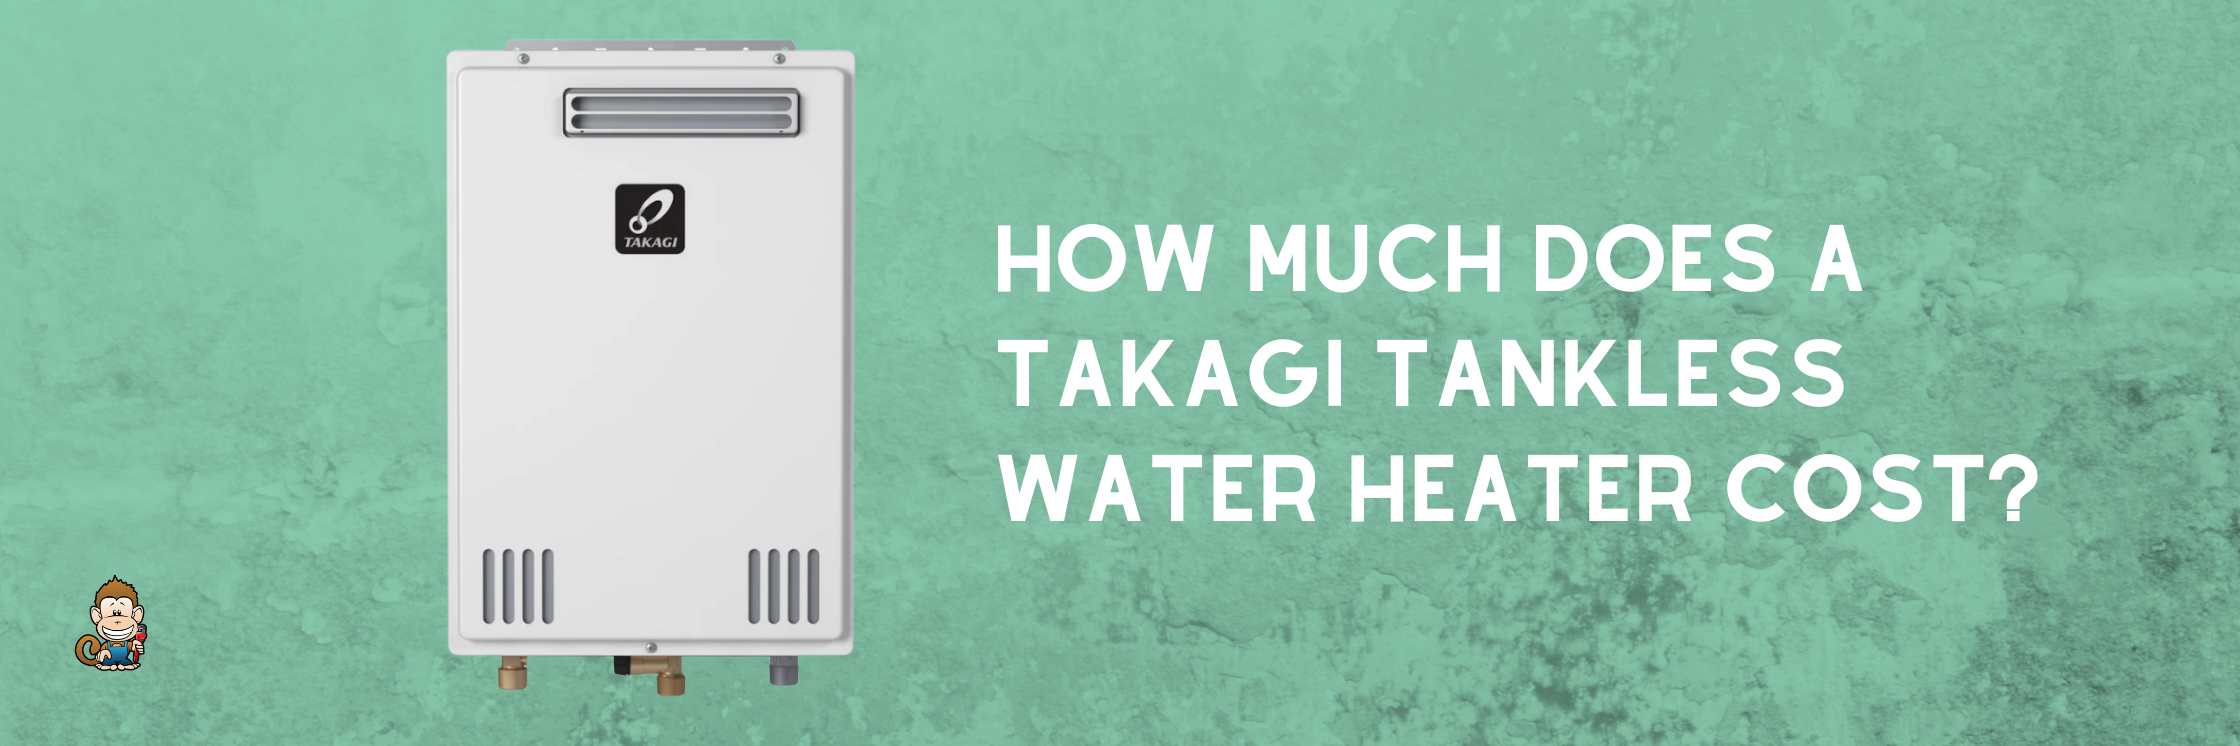 How Much Does a Takagi Tankless Water Heater Cost?